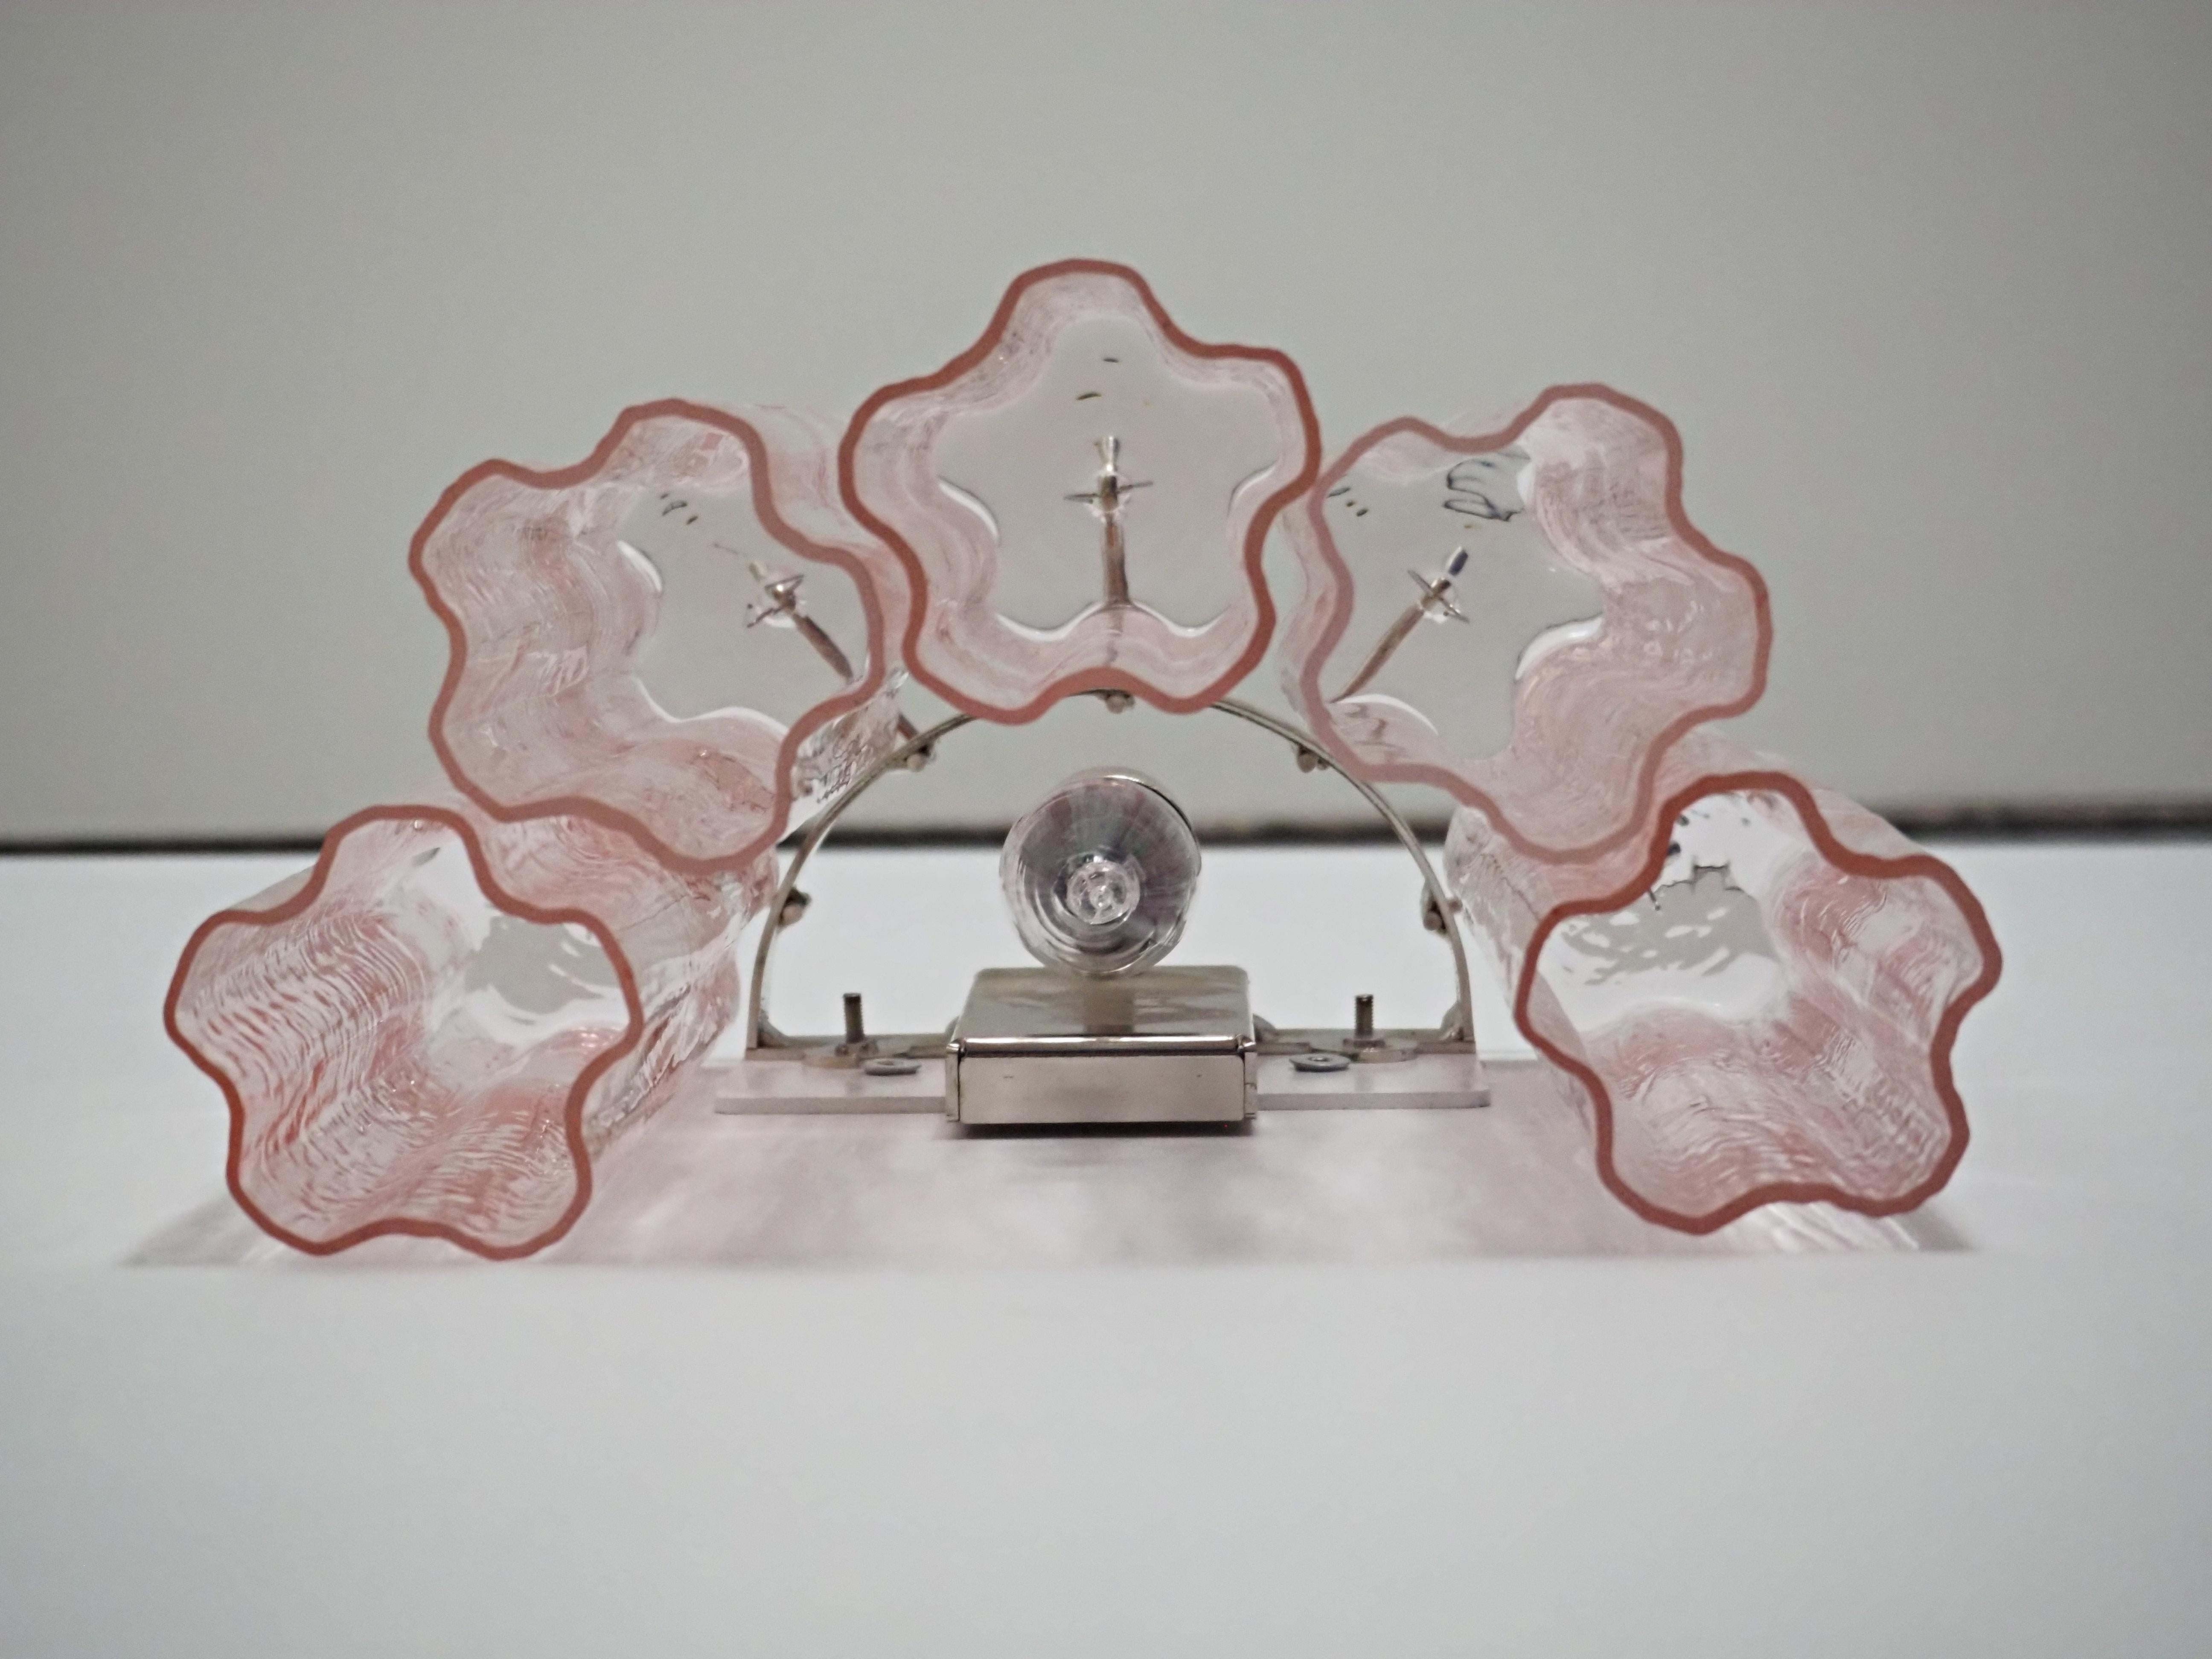 Fantastic pair of Murano Glass Tube wall sconces - 5 pink glass tube 8